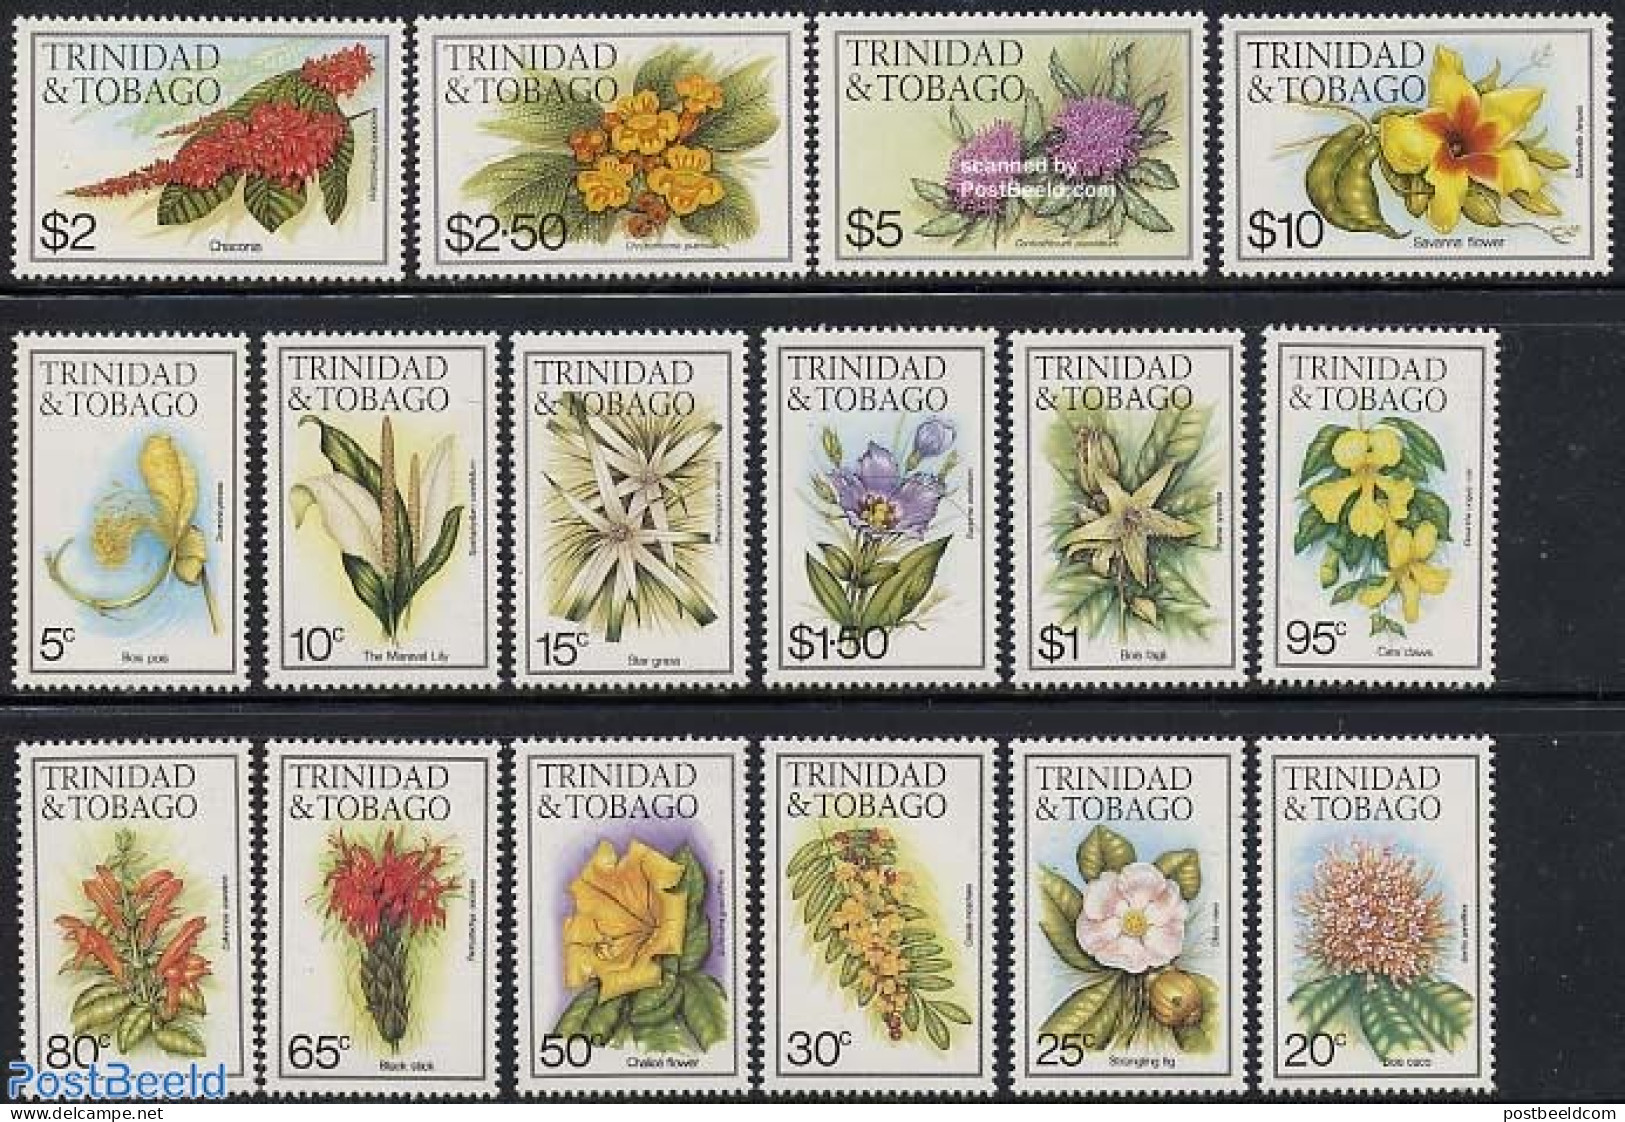 Trinidad & Tobago 1983 Definitives, Flowers 16v (without Year), Mint NH, Nature - Flowers & Plants - Trinidad & Tobago (1962-...)